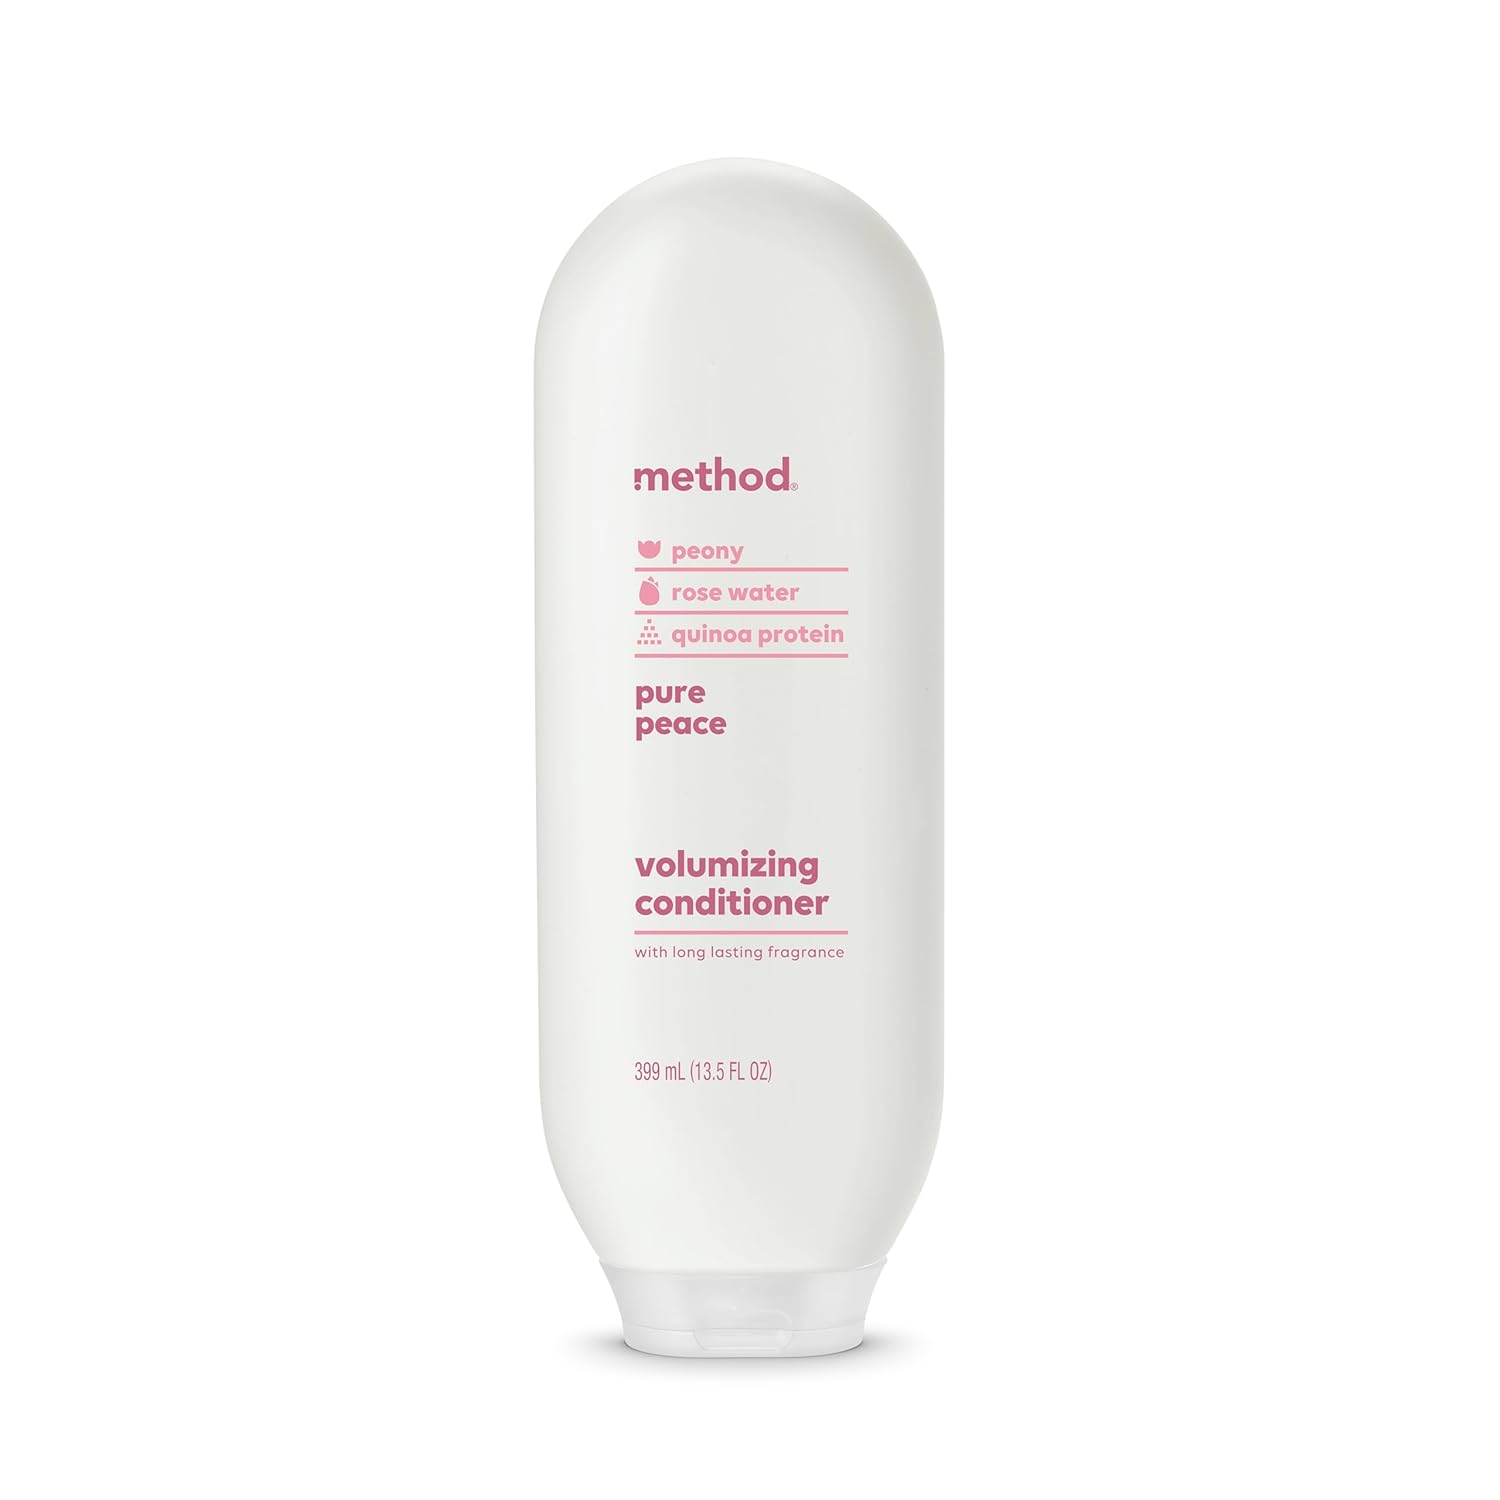 Method Volumizing Conditioner, Pure Peace with Rose, Peony, and Pink Sea Salt Scent Notes, Paraben and Sulfate Free, 13.5 oz (Pack of 1)